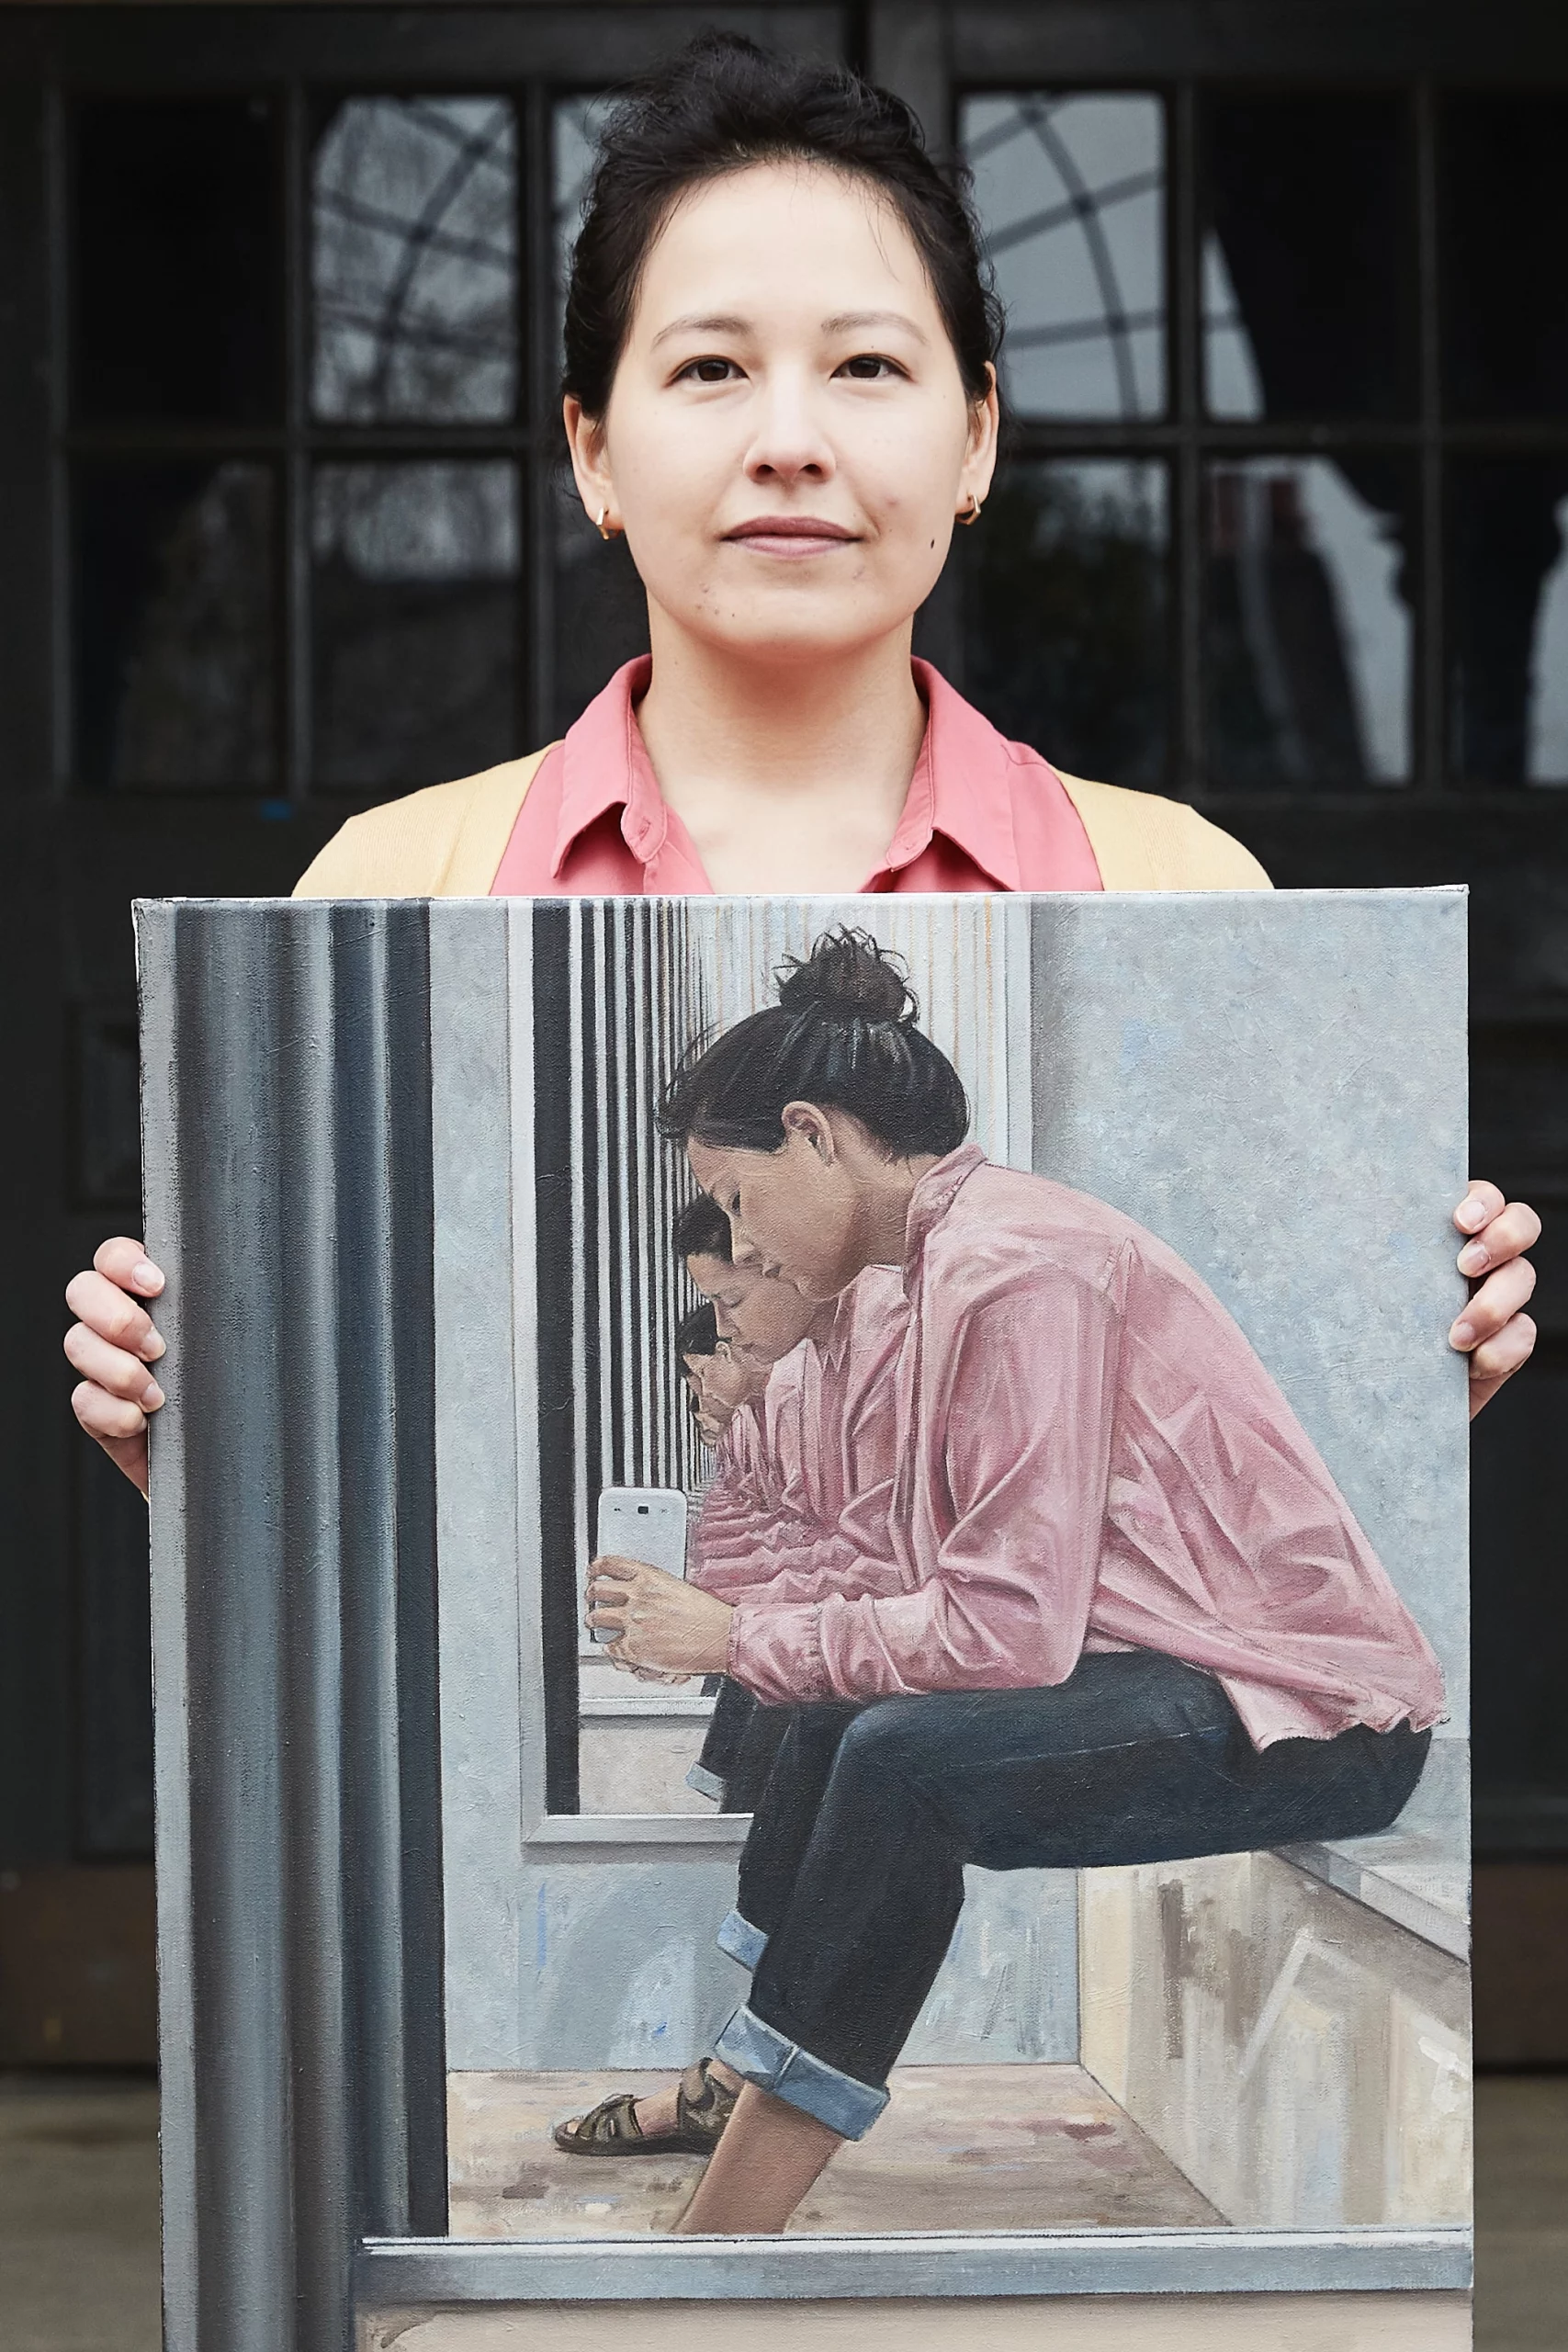 Sarah Finch Portrait artist of the year series